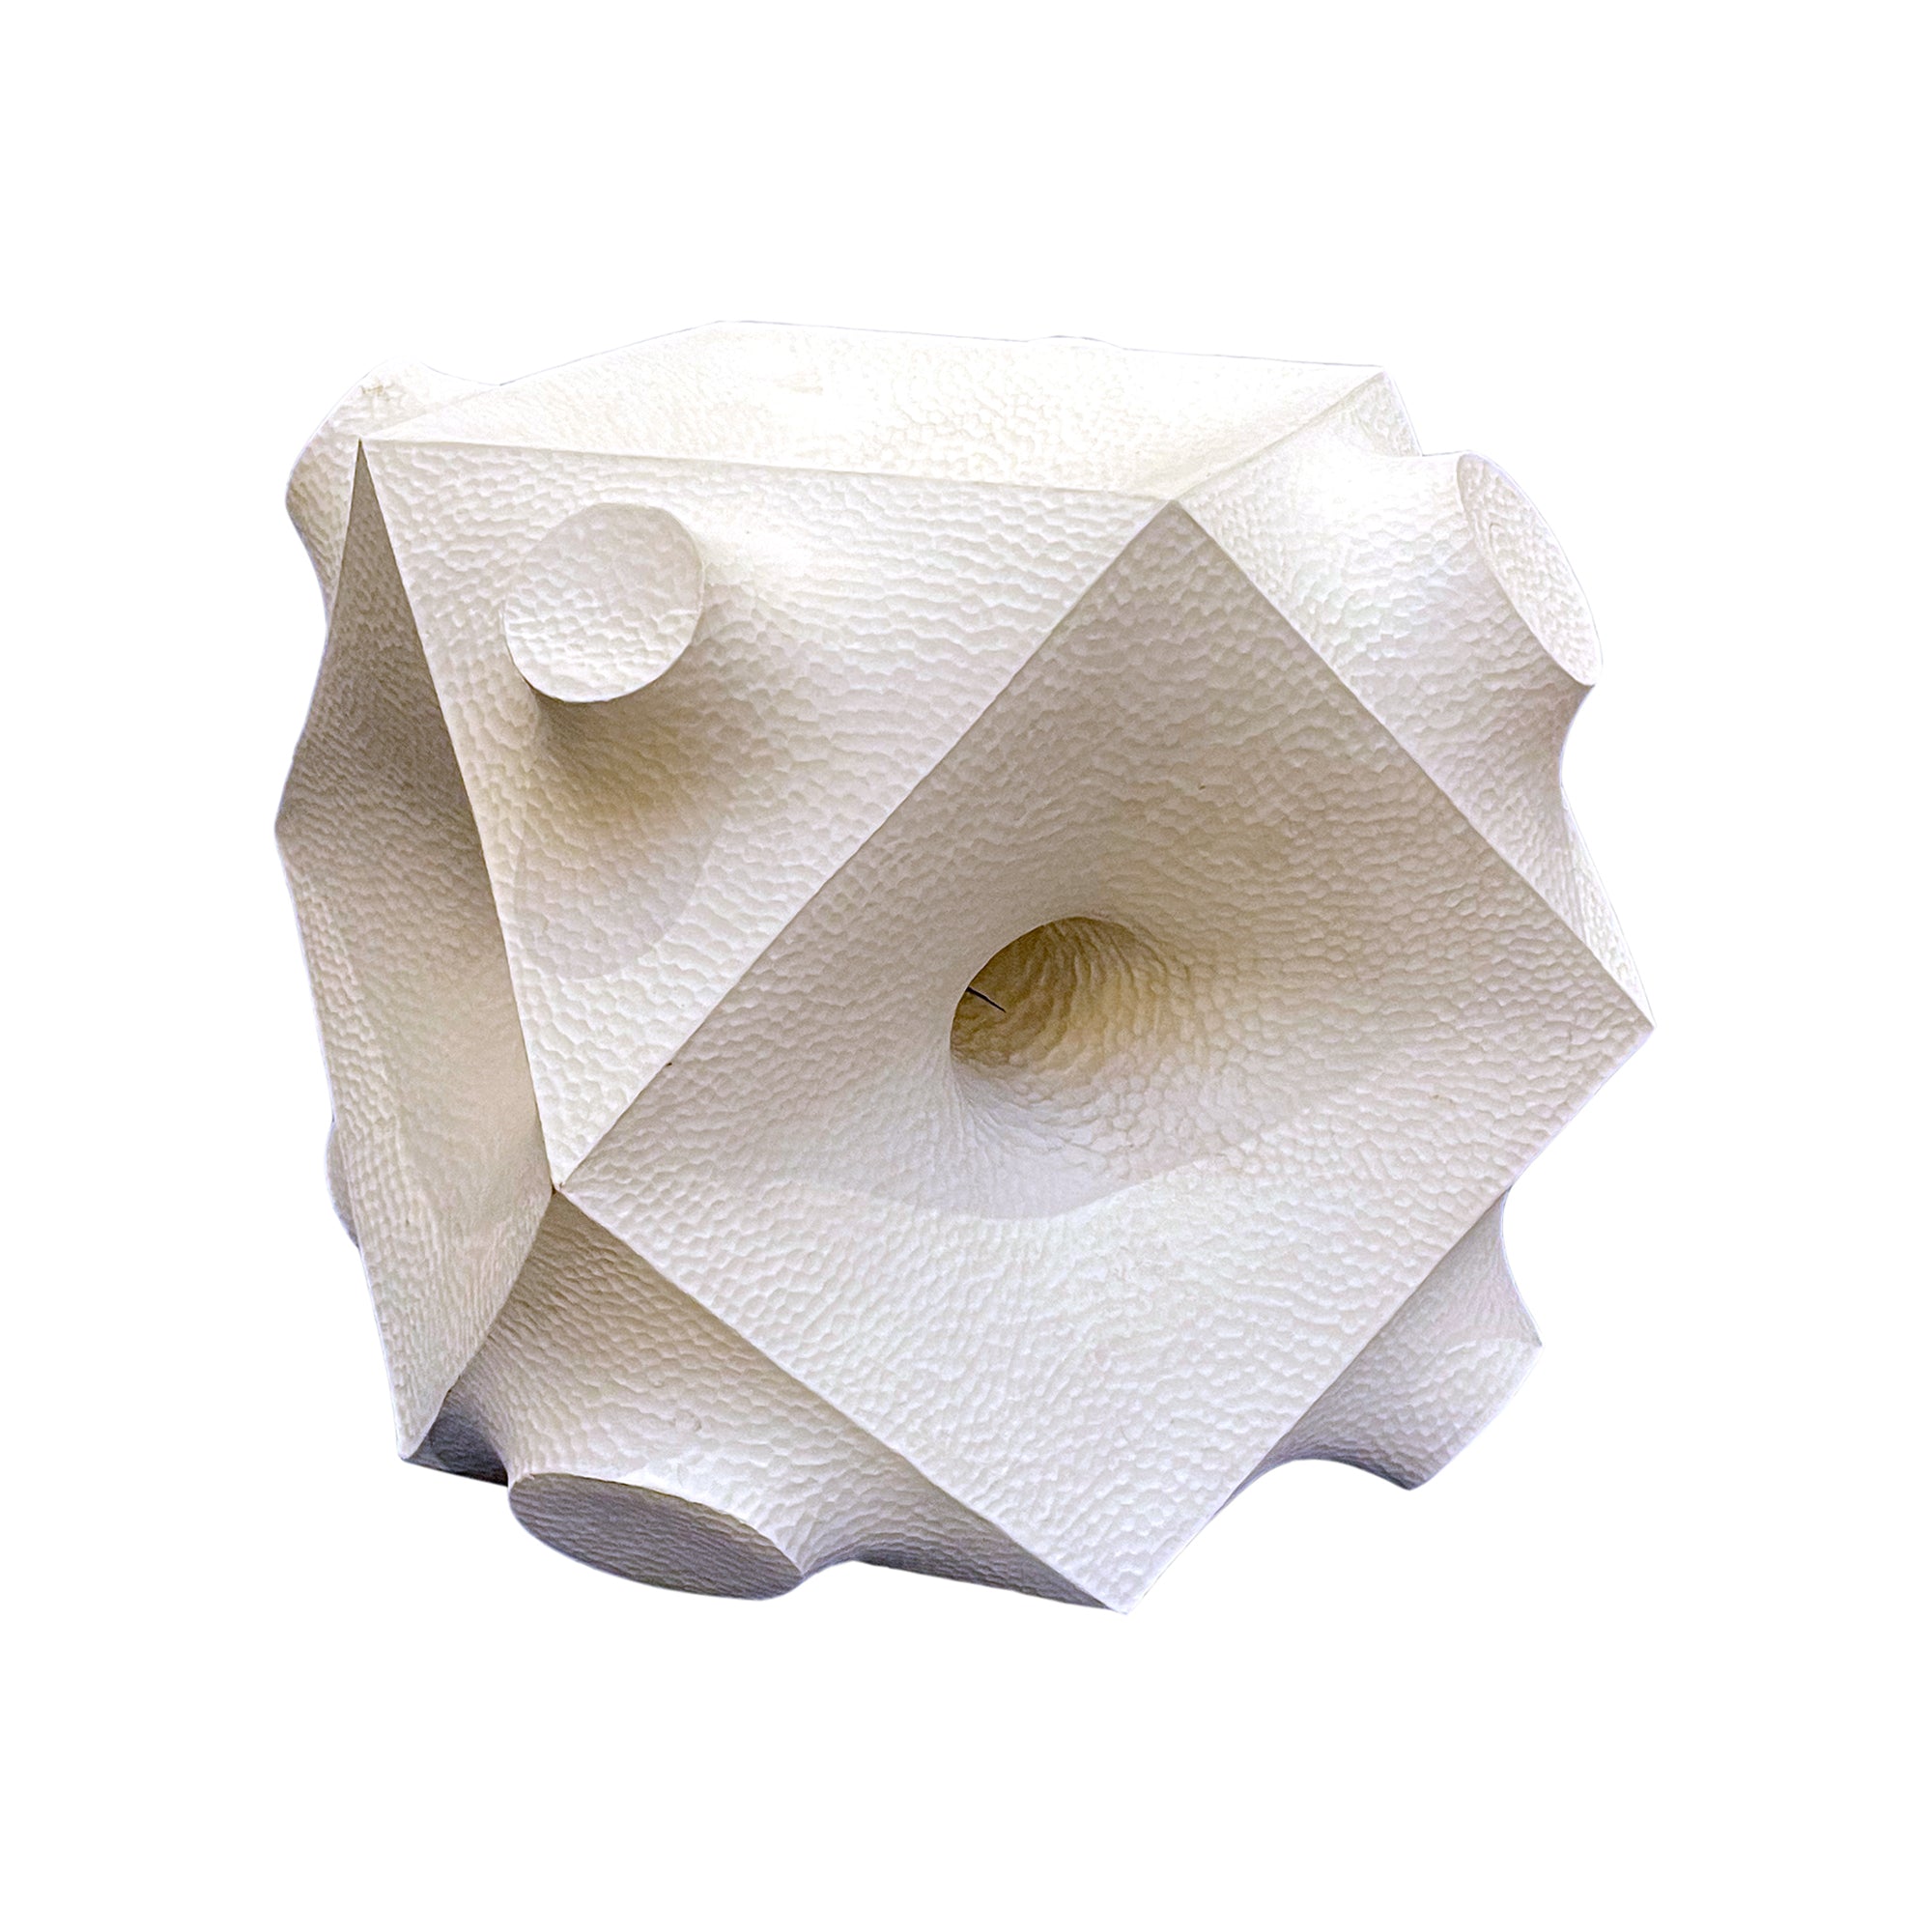 Cast Ceramic Abstracted Cuboctahedron Sculpture by Aleph Geddis